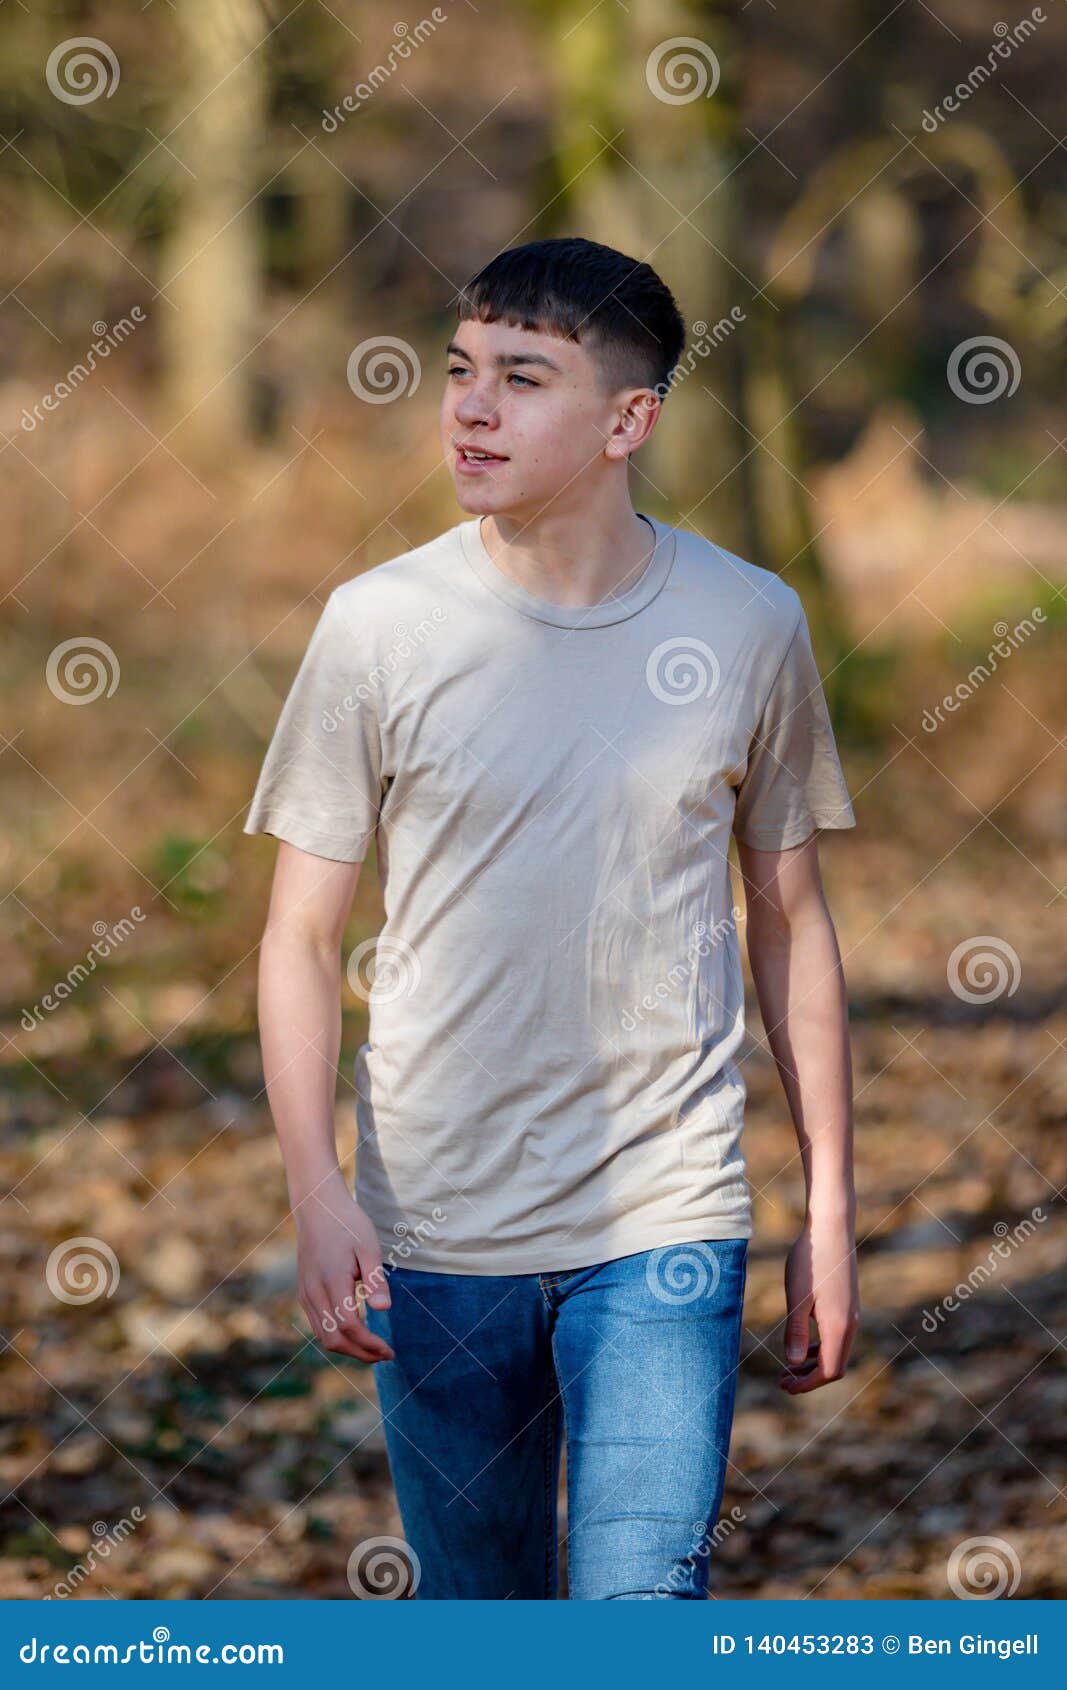 Teenage Boy Outside on a Bright Spring Day Stock Image - Image of happy ...